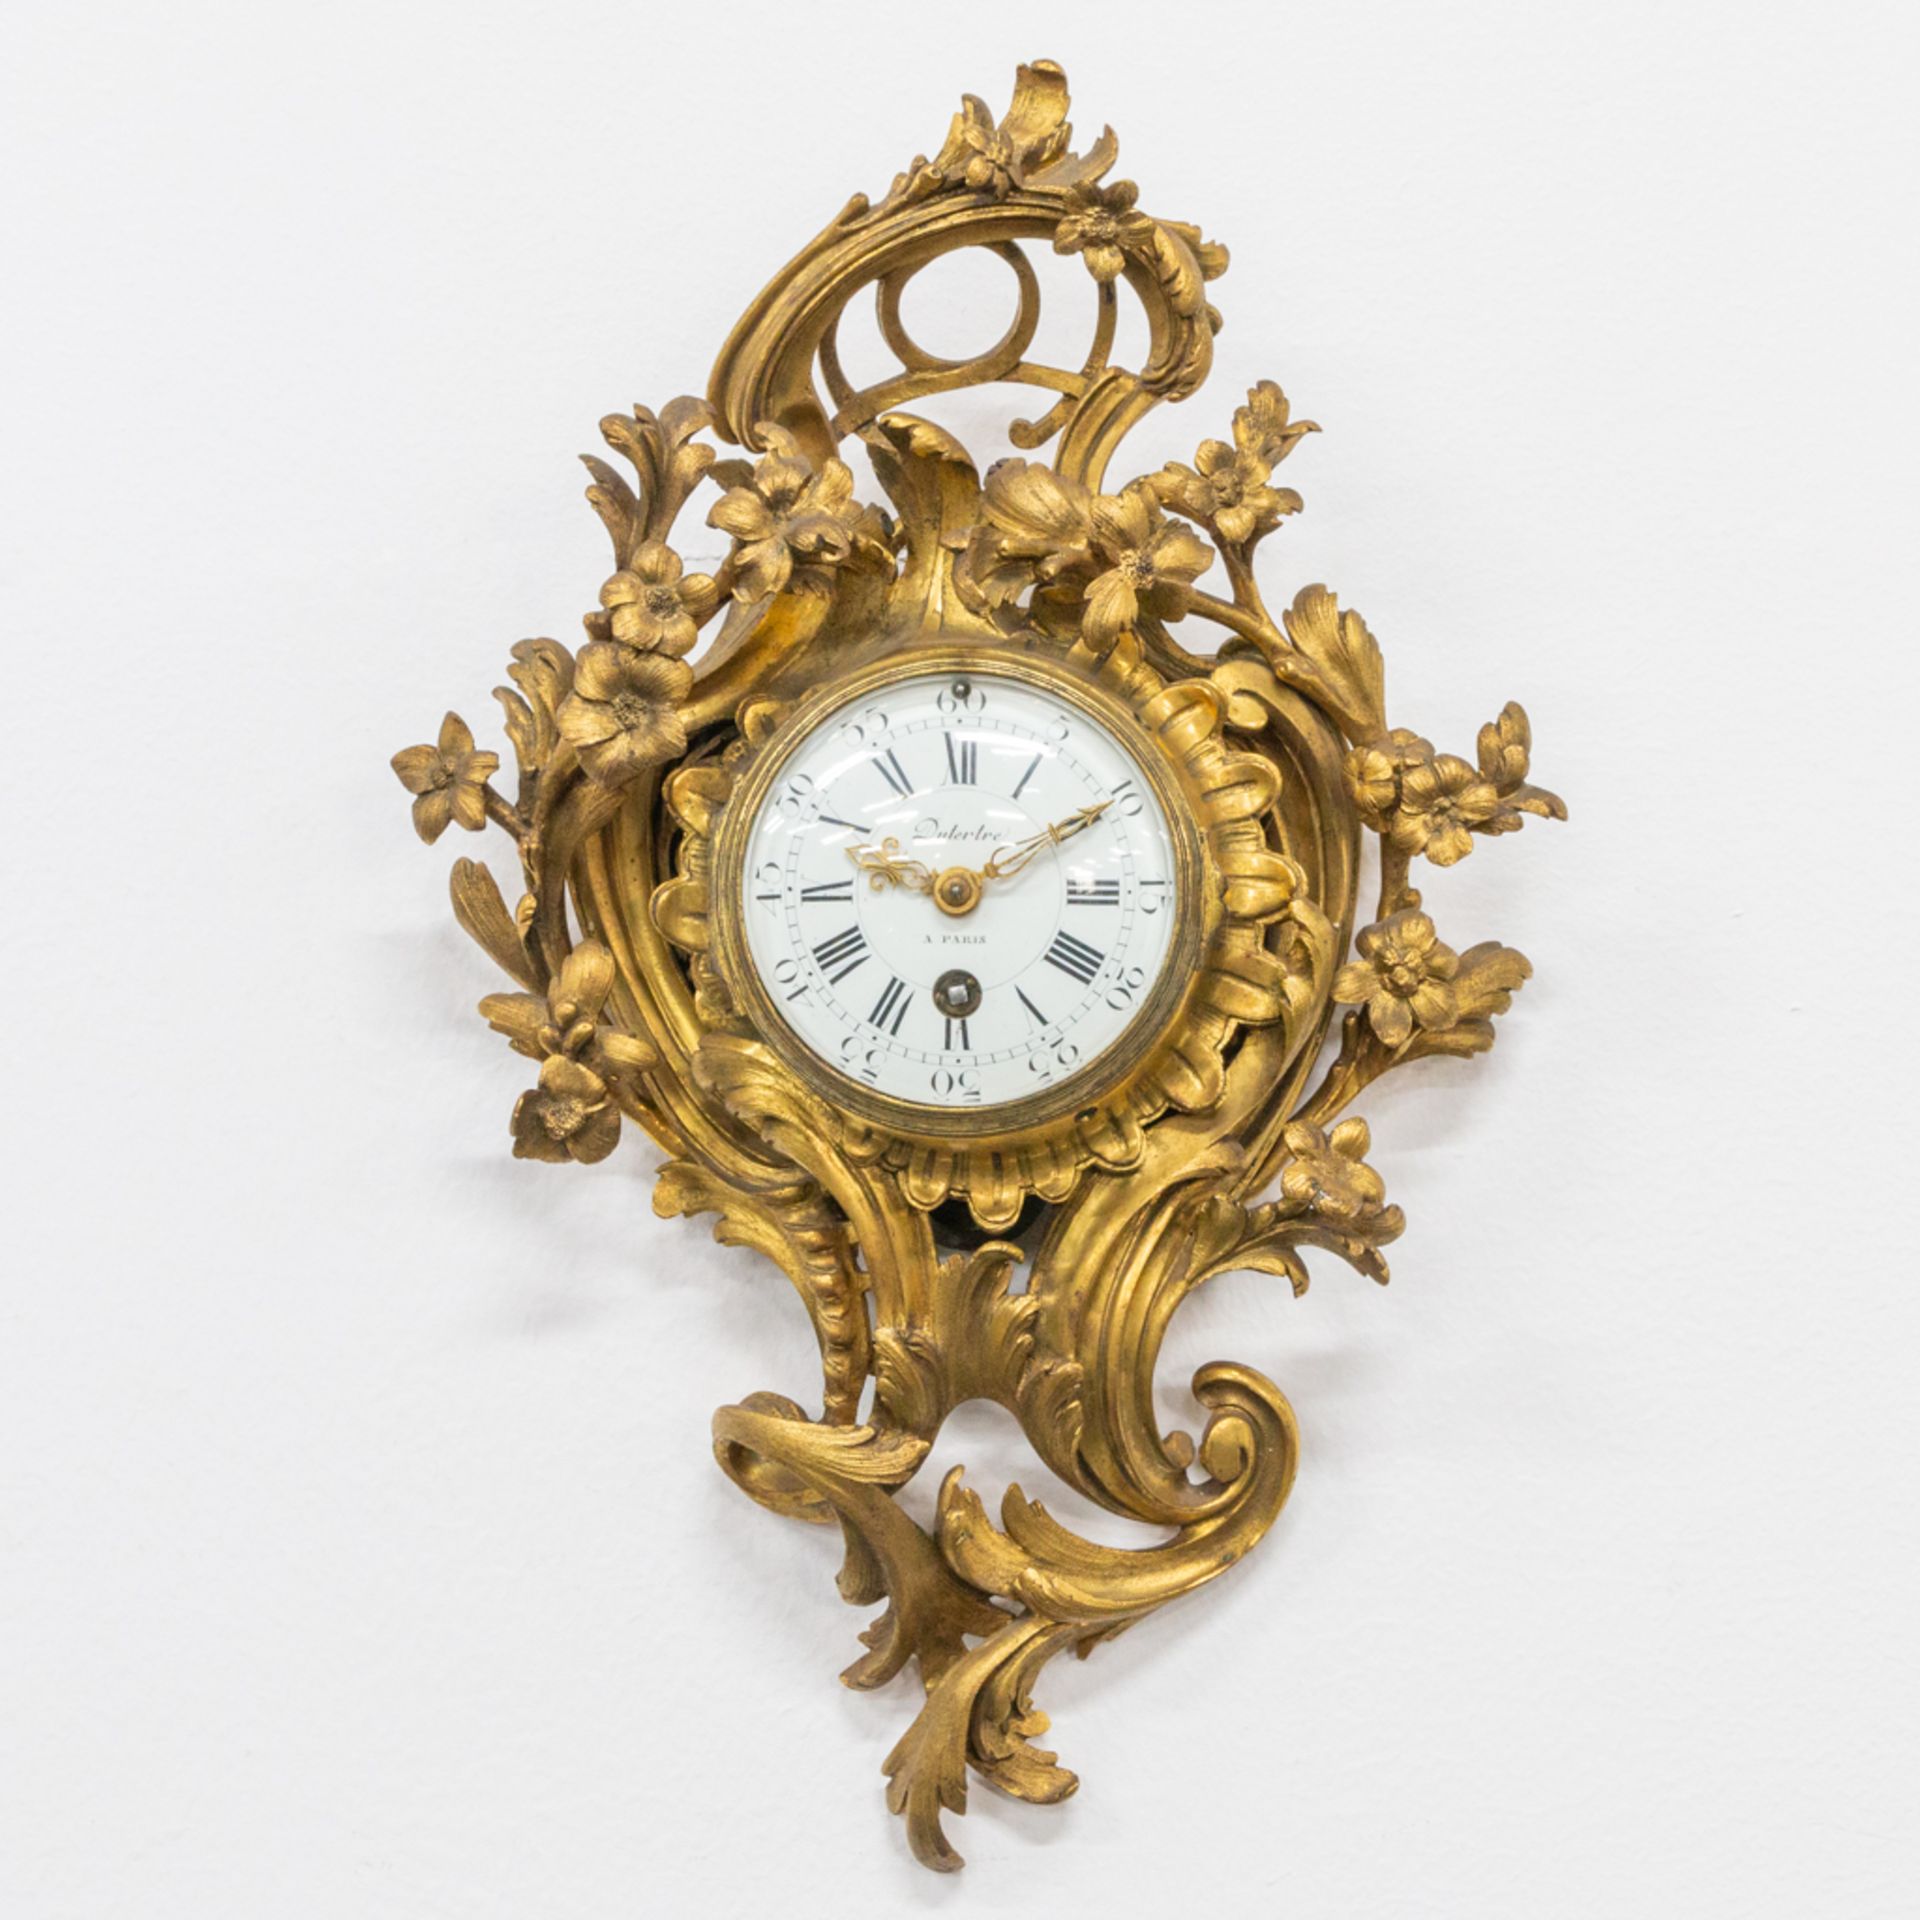 A small cartel clock made of bronze in Louis XV style, Dutertre ˆ Paris and marked Marti 1889. 19th